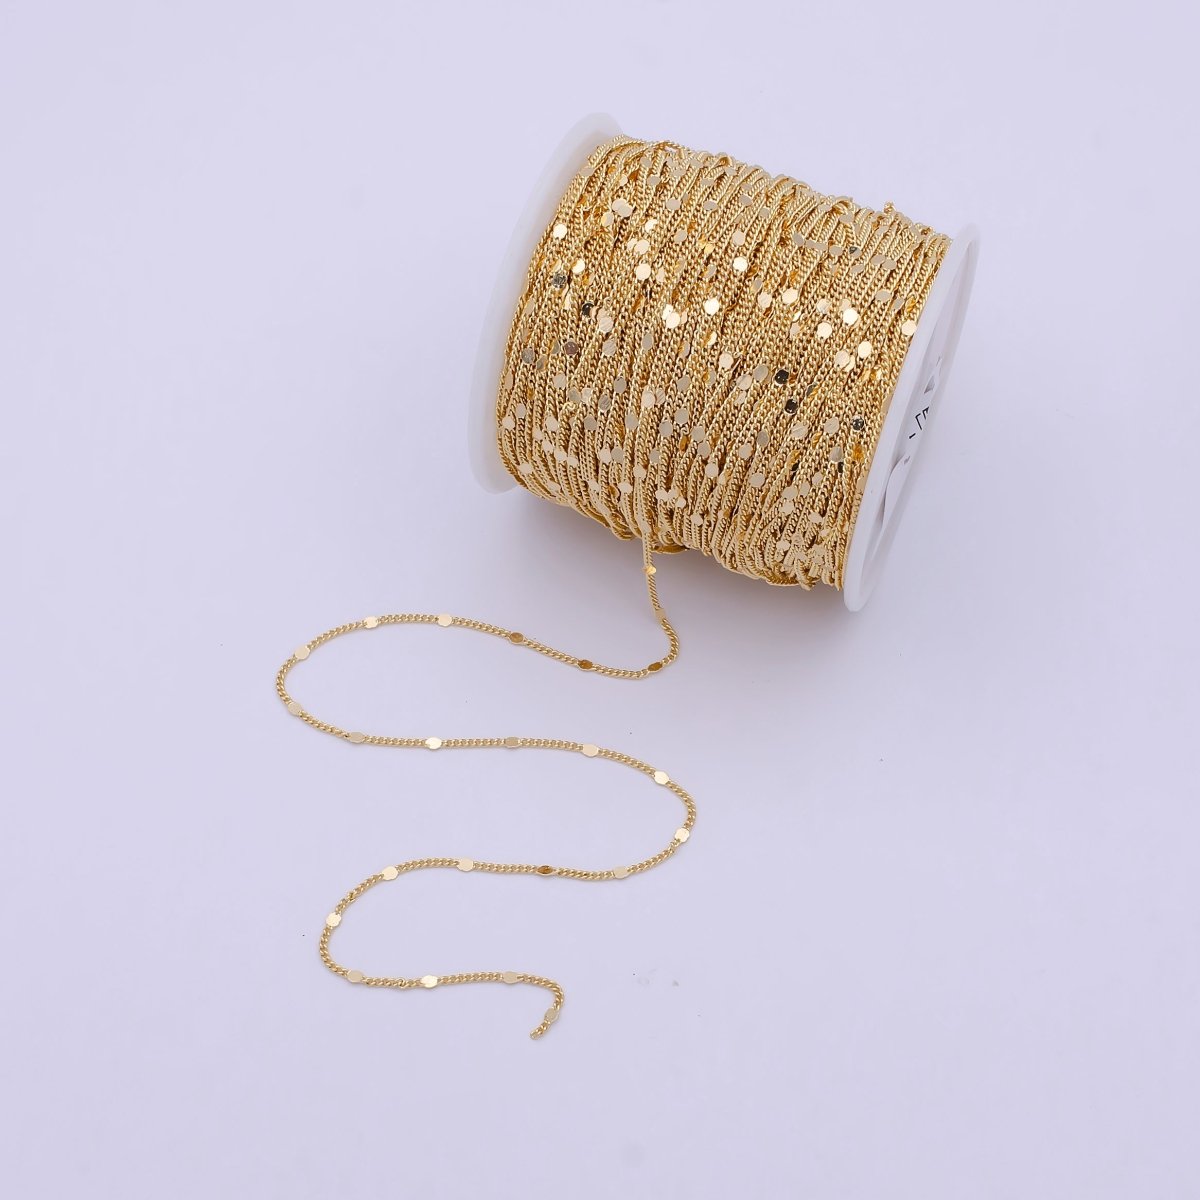 24K Gold Filled Unique Curb Unfinished Chain by Yard, Dainty 2mm Flat Tube Link, Wholesale Unique Bulk Roll For Jewelry Making | ROLL-715 Clearance Pricing - DLUXCA